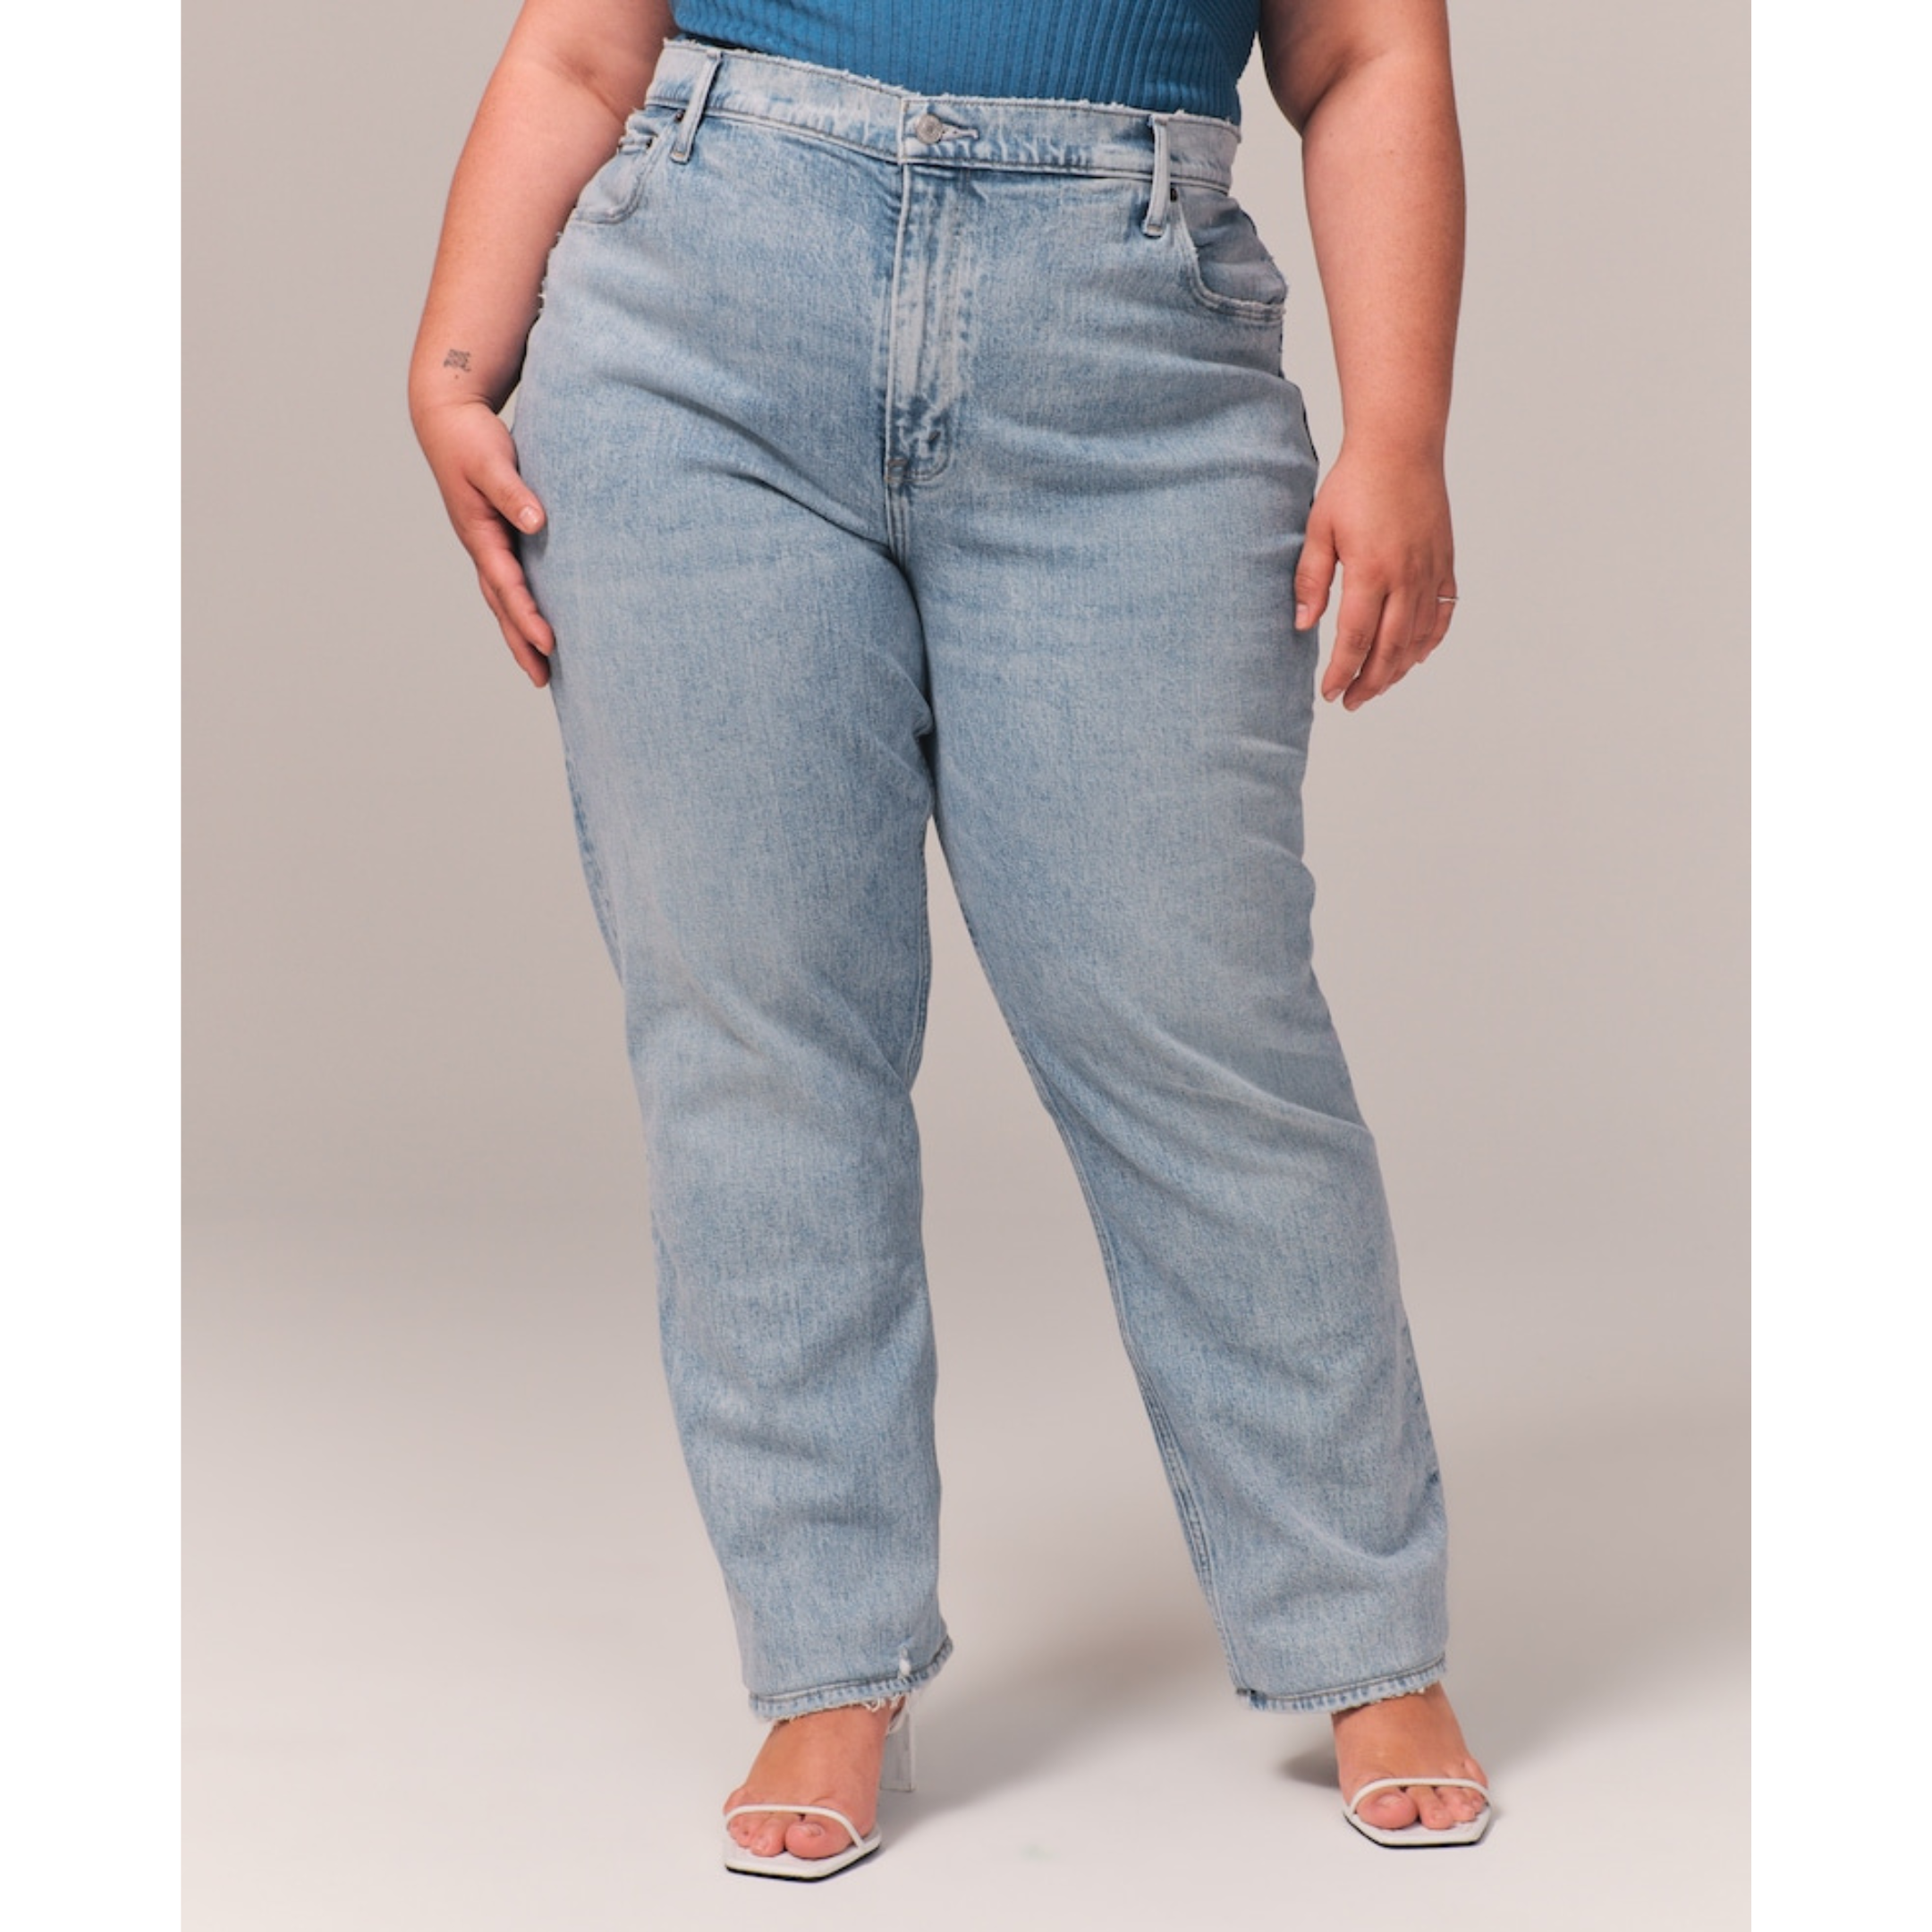 Fall Jeans + Pants for Curvy Girls - Sweet Sauce Blog